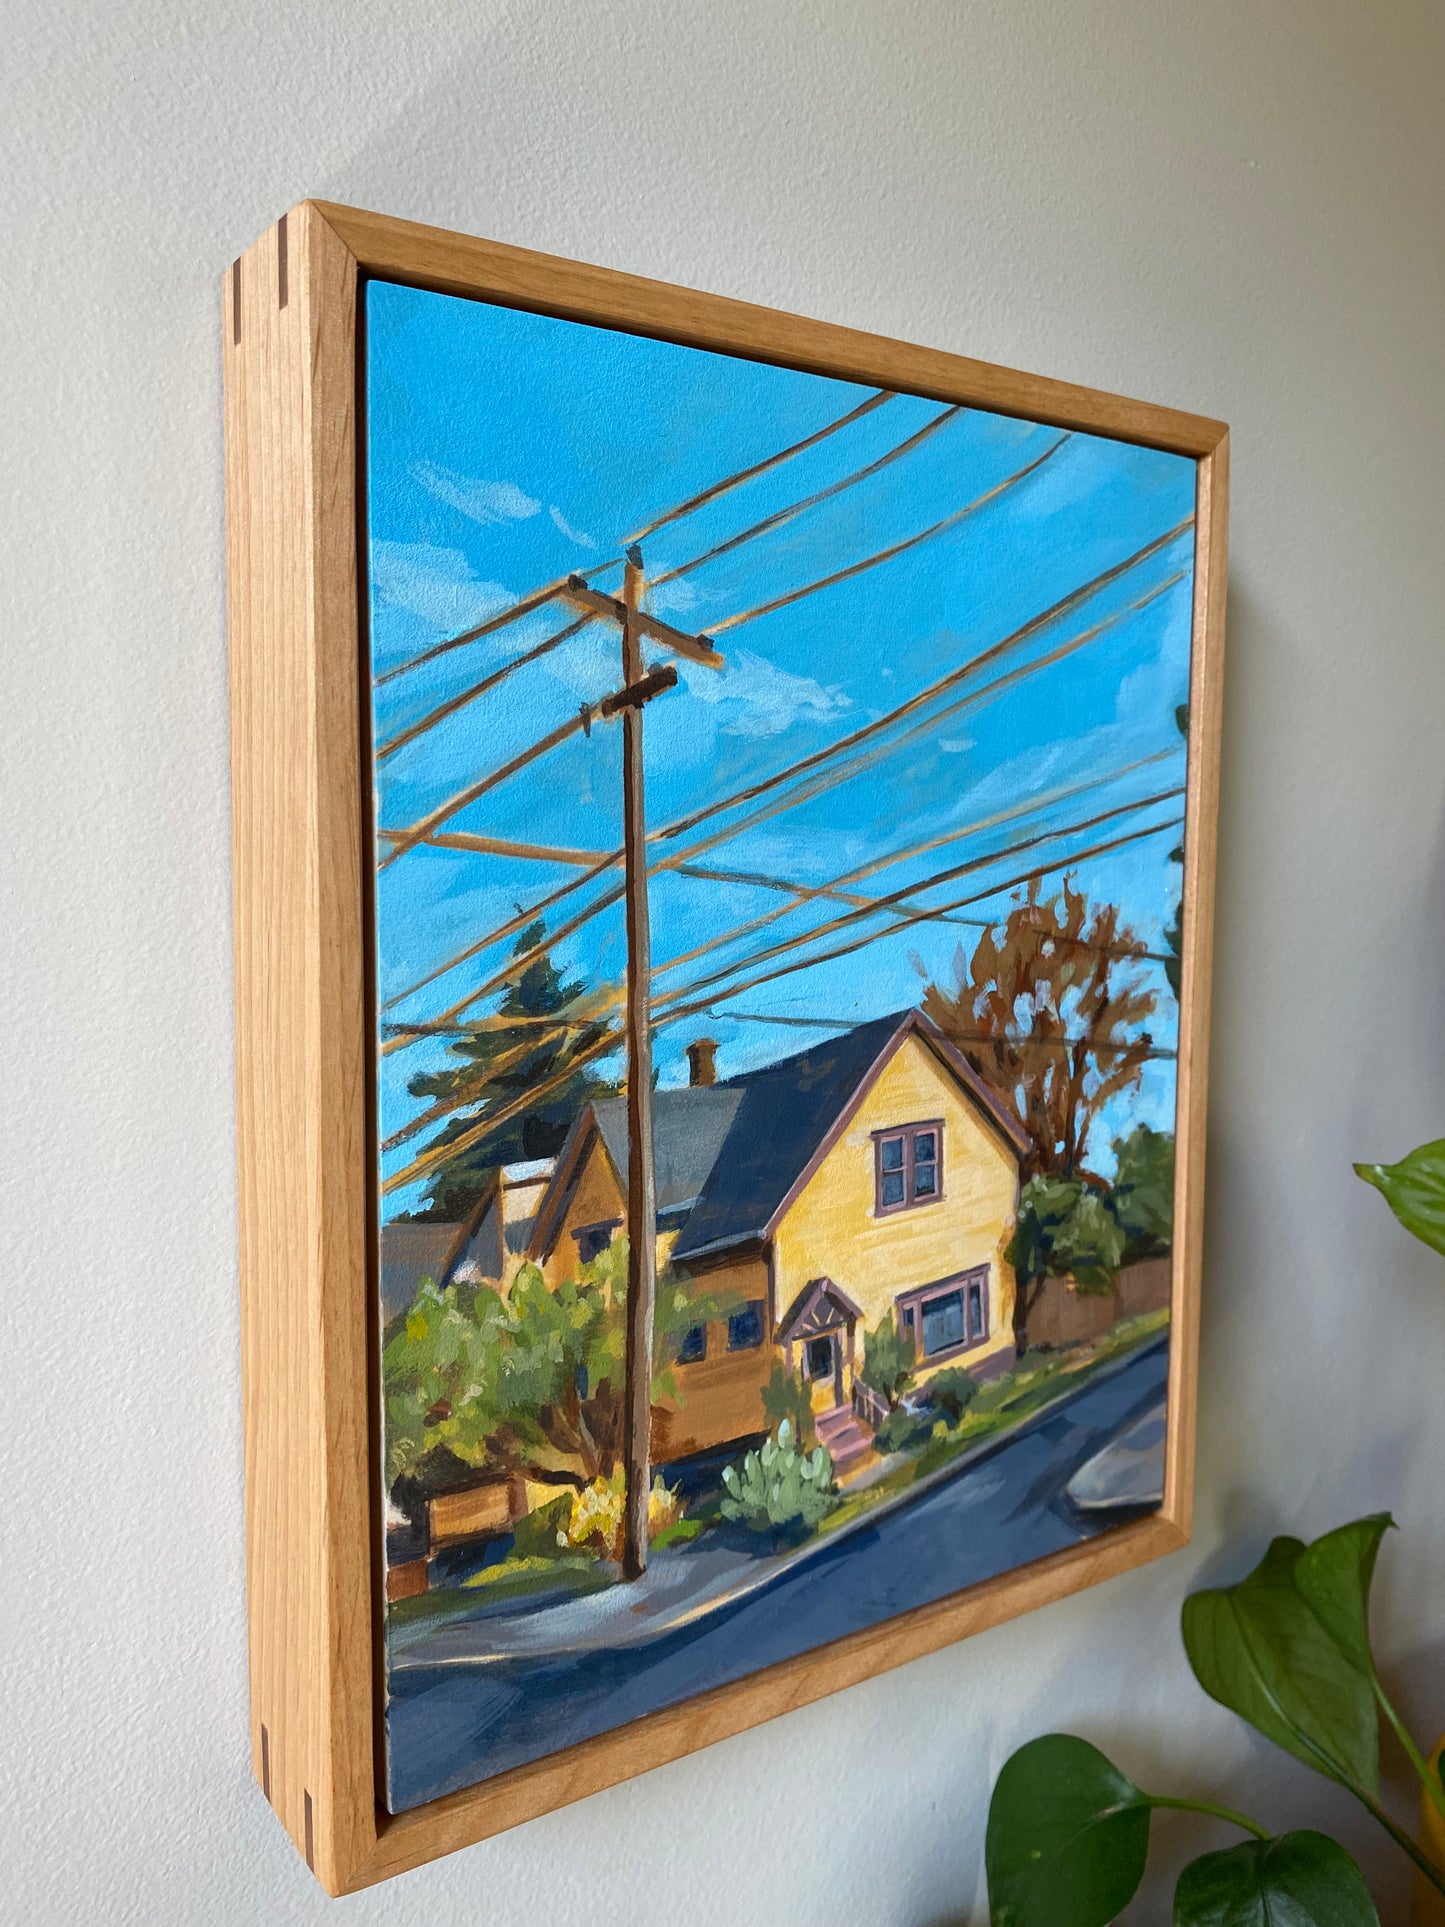 Framed 8x10 painting of a yellow house in a Portland neighborhood.  View from the left angle.